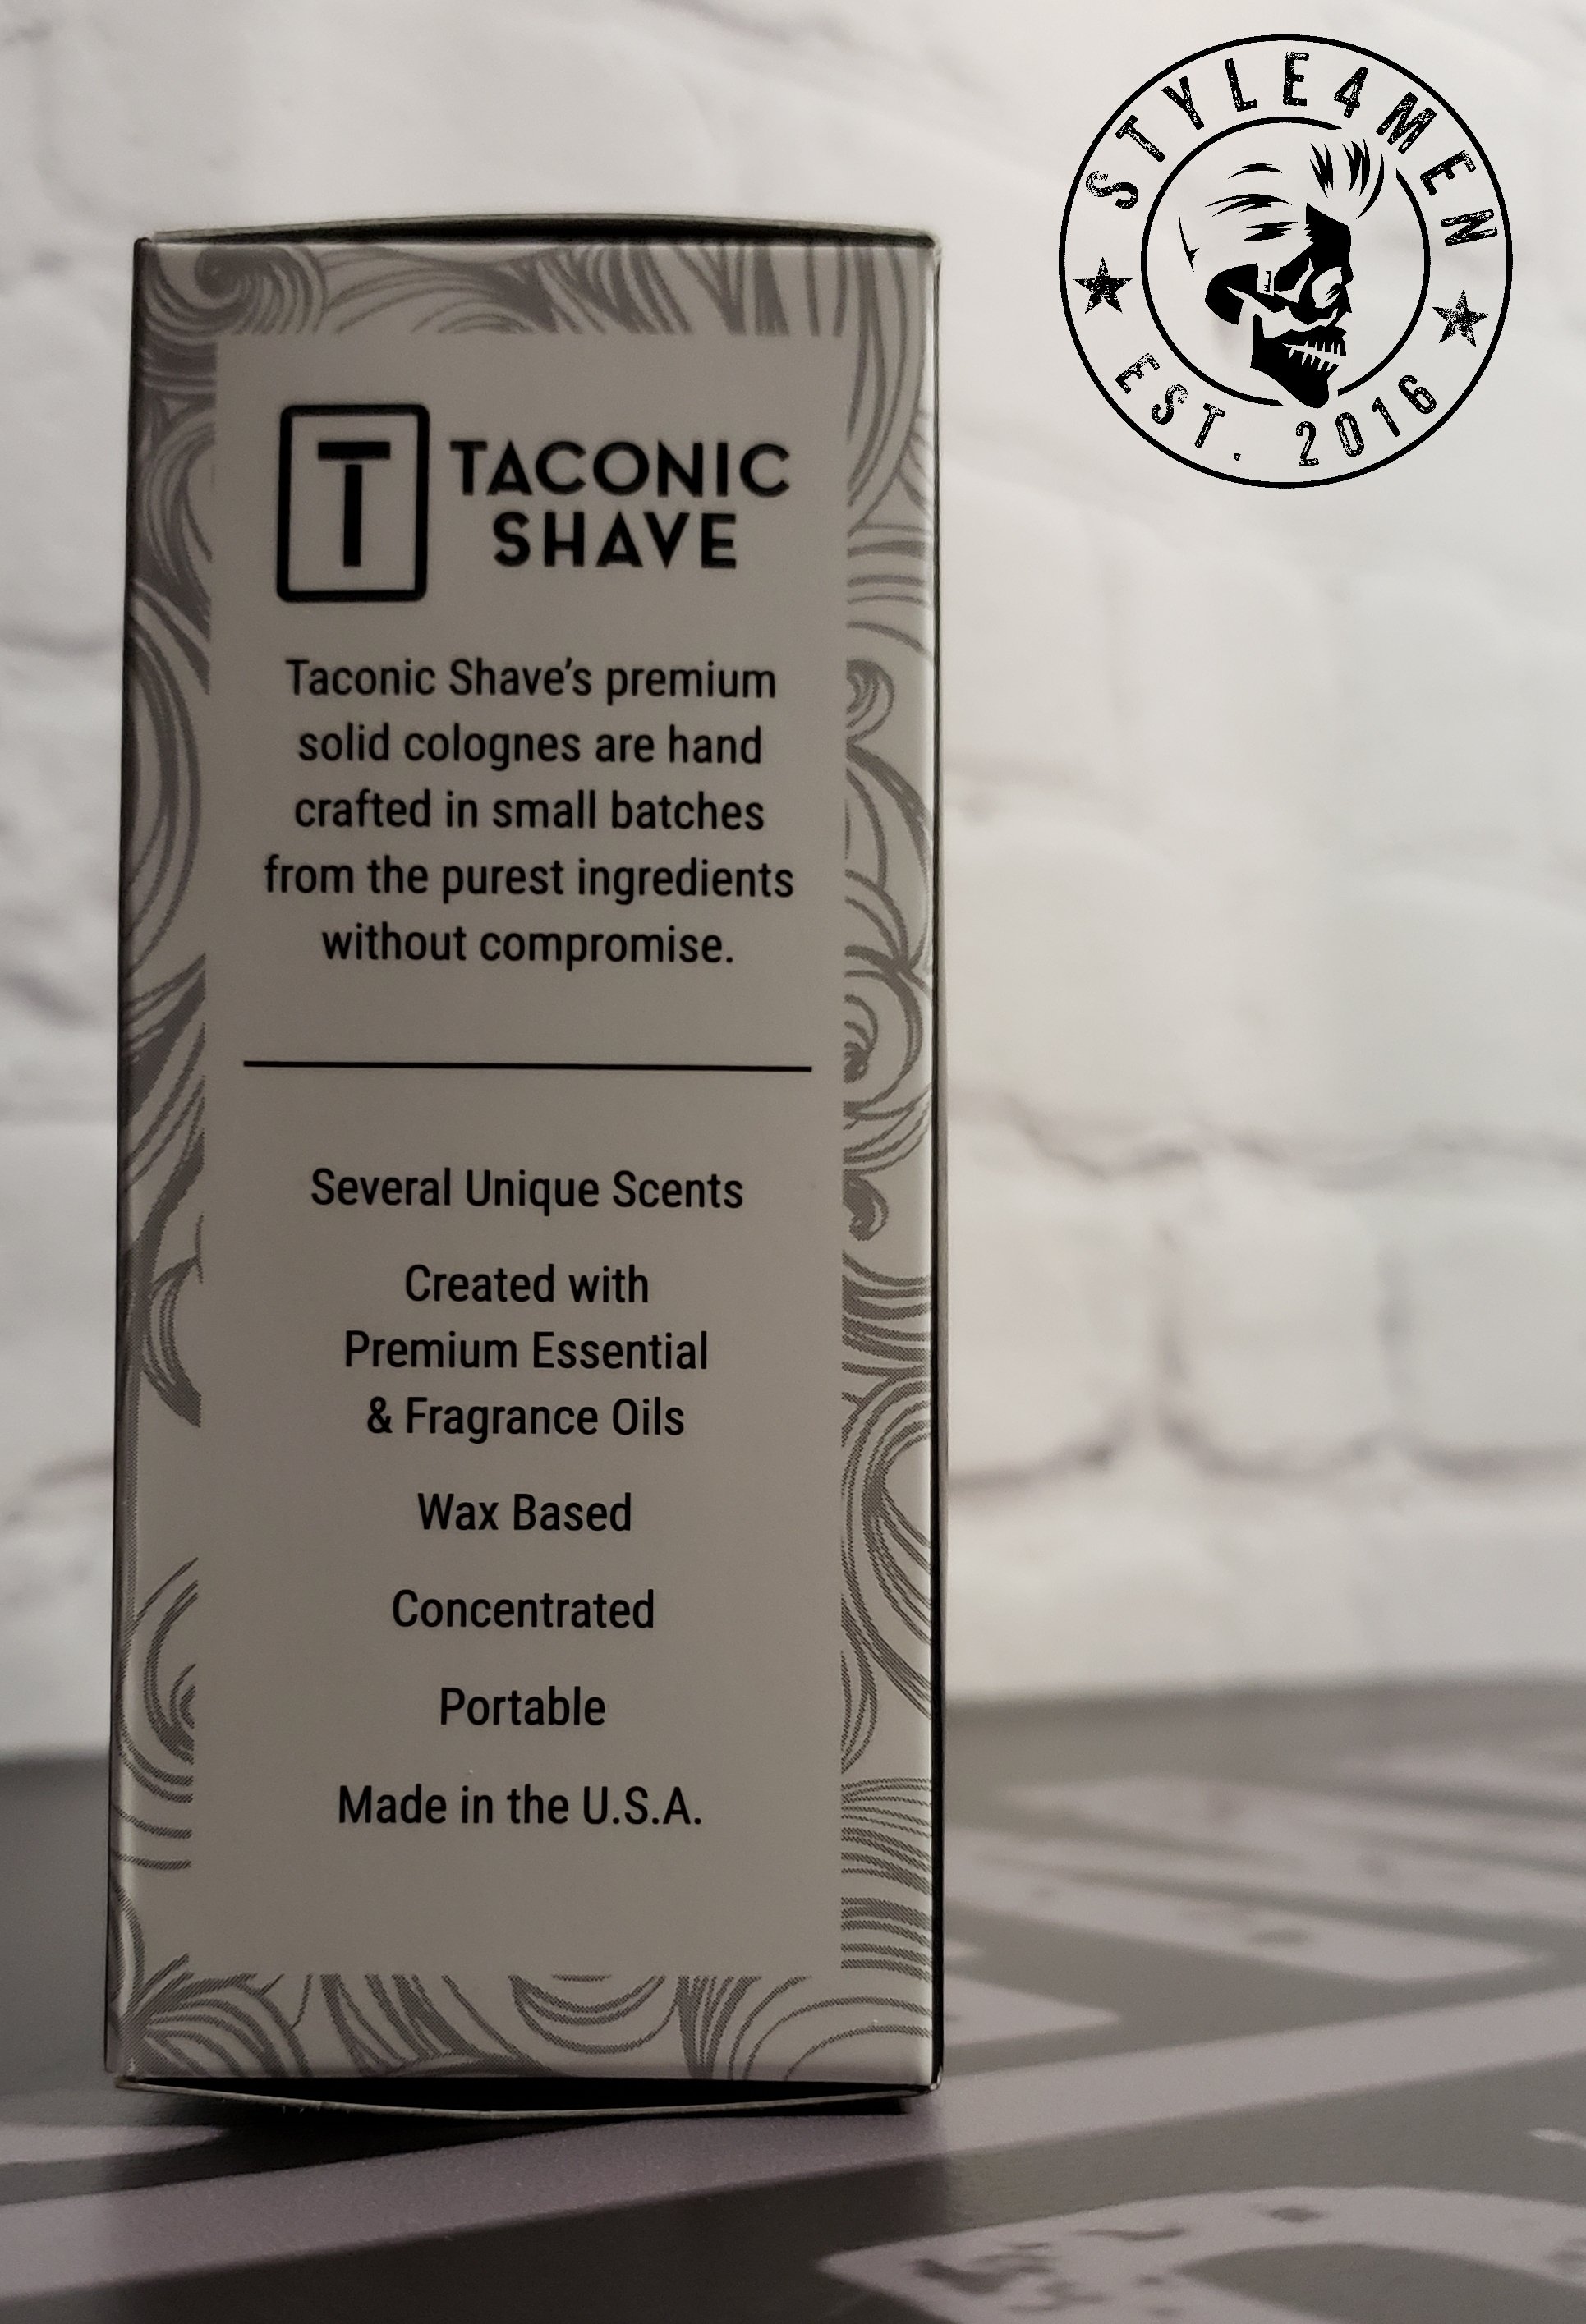 Taconic shave Solid Colognes